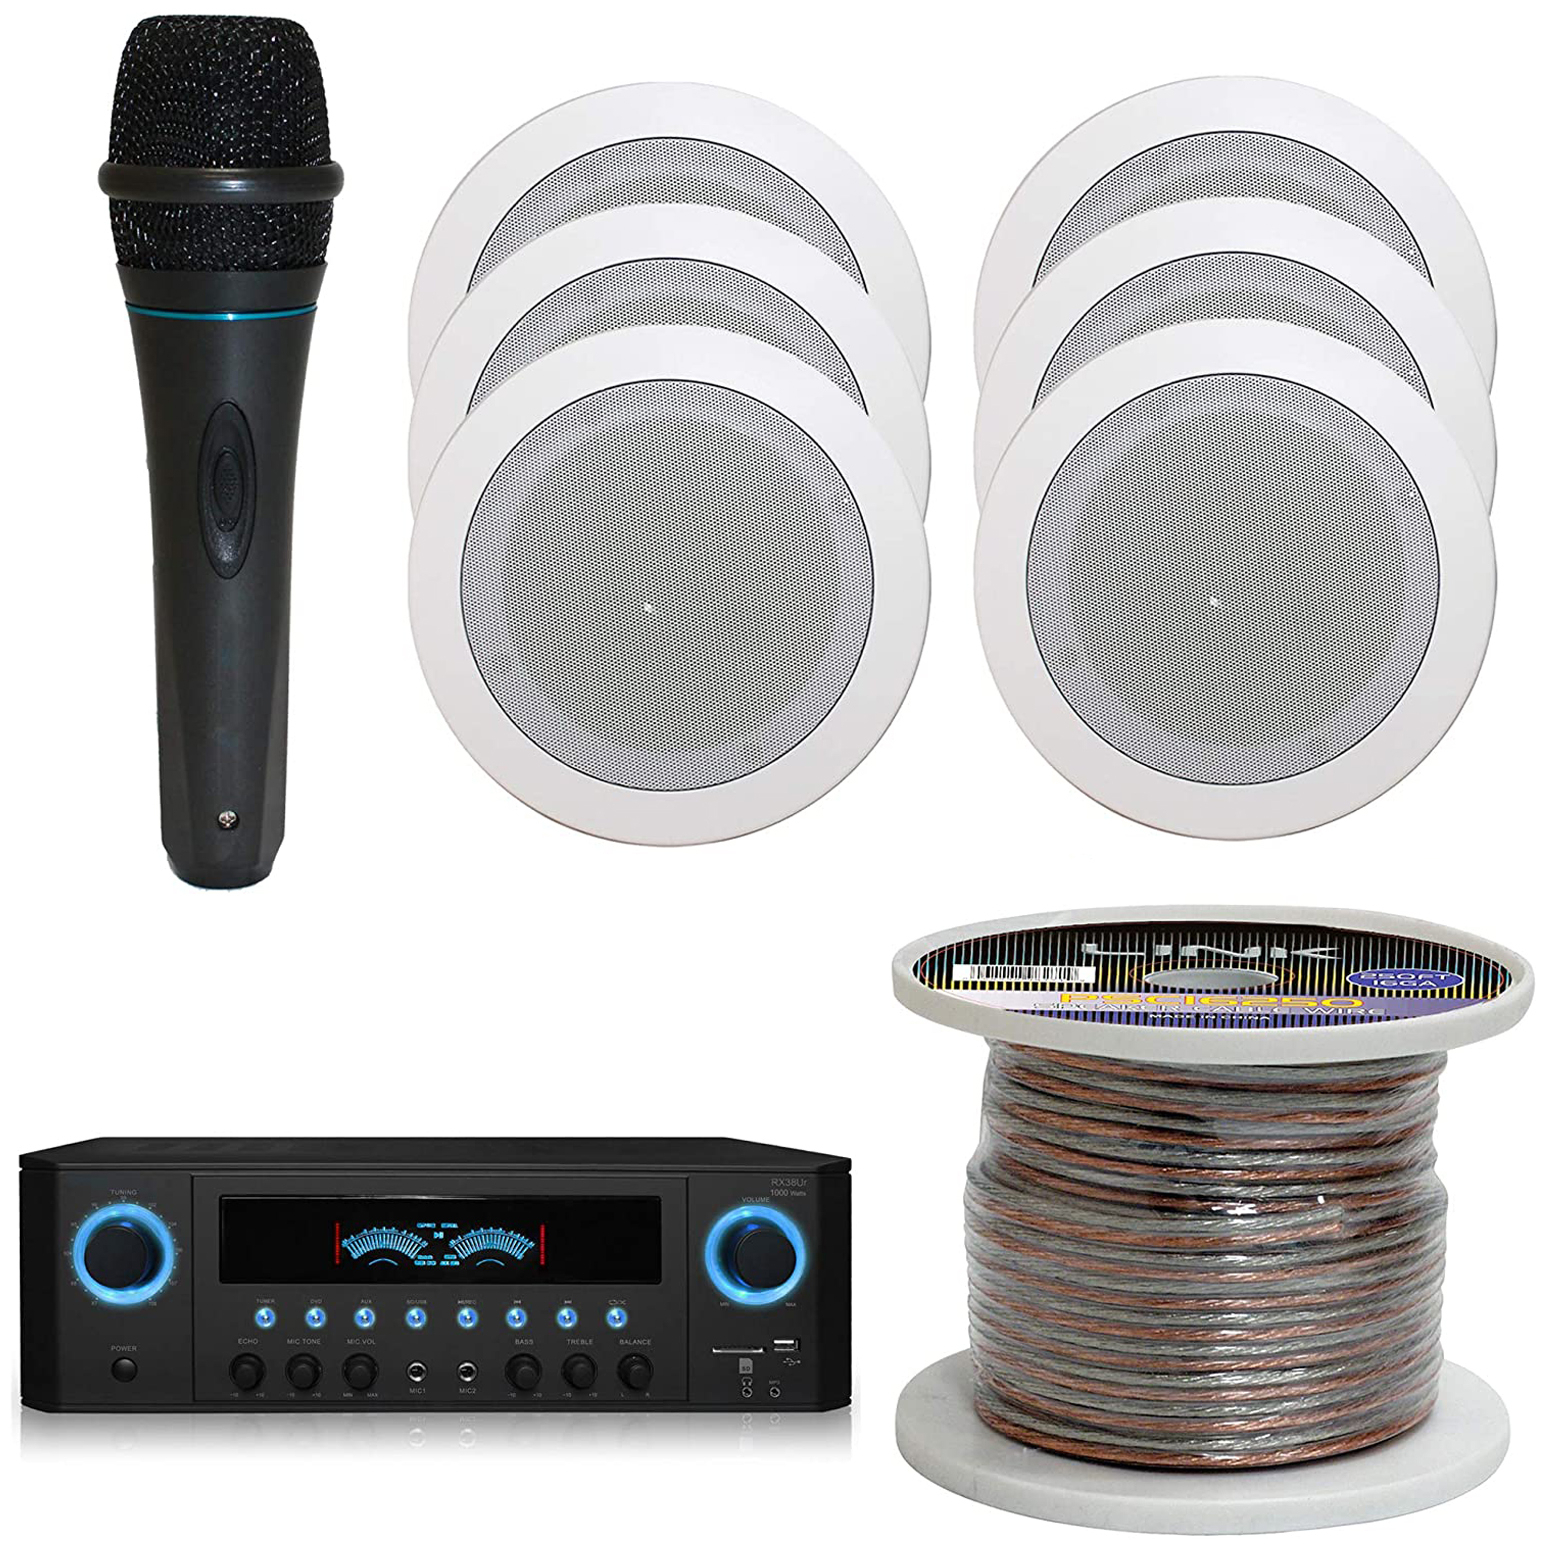 TPro 1000 W Home System W/ USB & SD Inputs, (Qty 6) 5.25 Flush Mount In-Wall Stereo Speakers, Mic W/ 10 Ft Cable & 250 Ft Speaker Wire